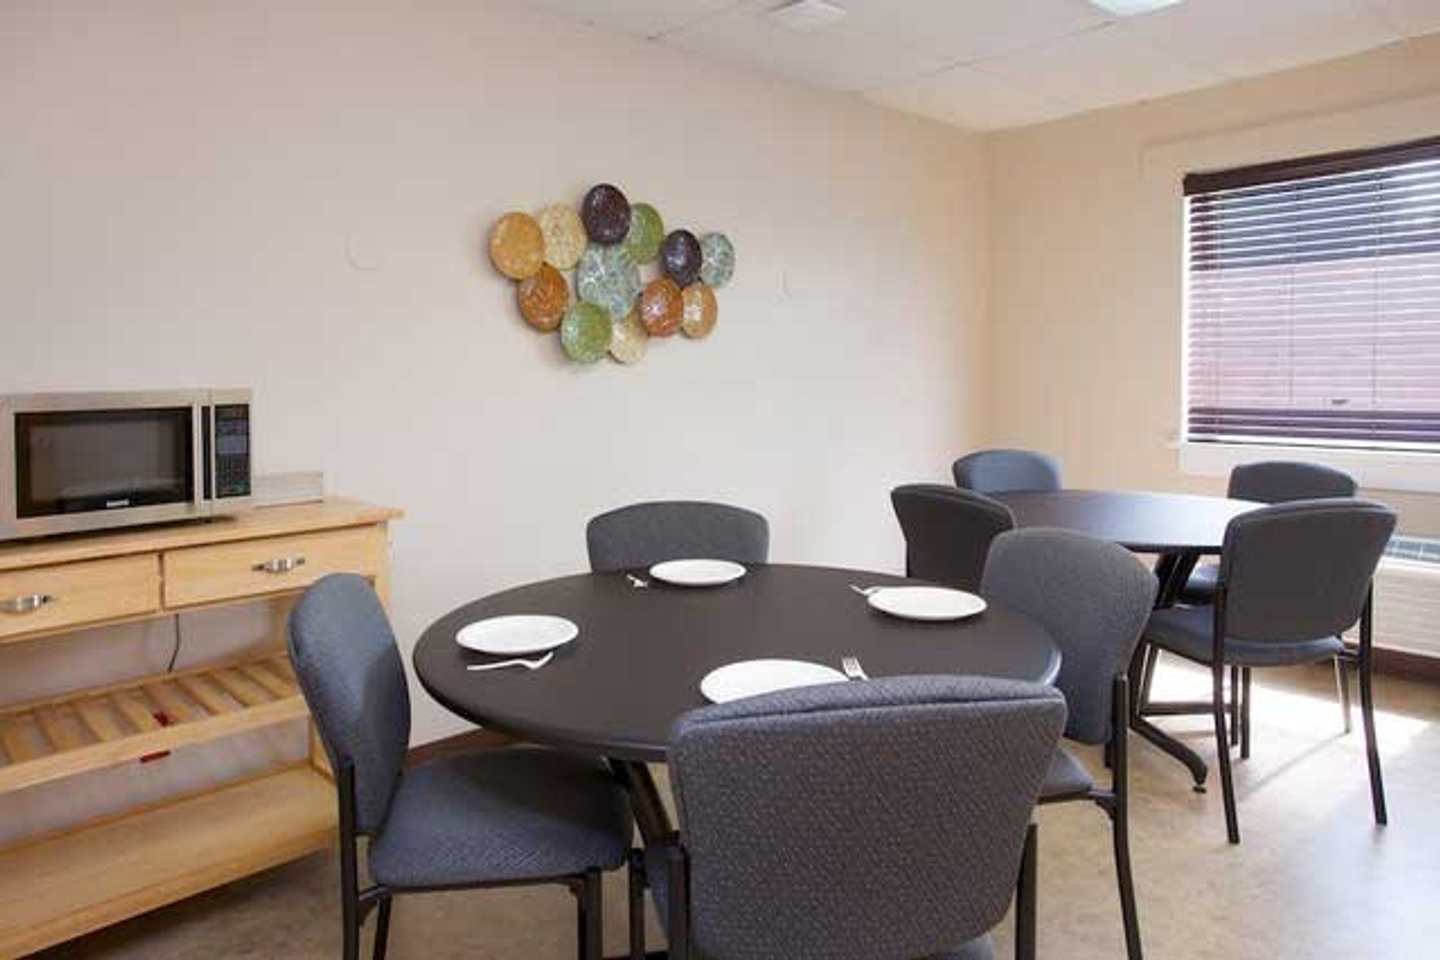 The dining room at Reflections Eating Disorder Treatment Center. Two round tables with four chairs around each of them. One table is set for four people with plates and forks. A table with a microwave is next to them.